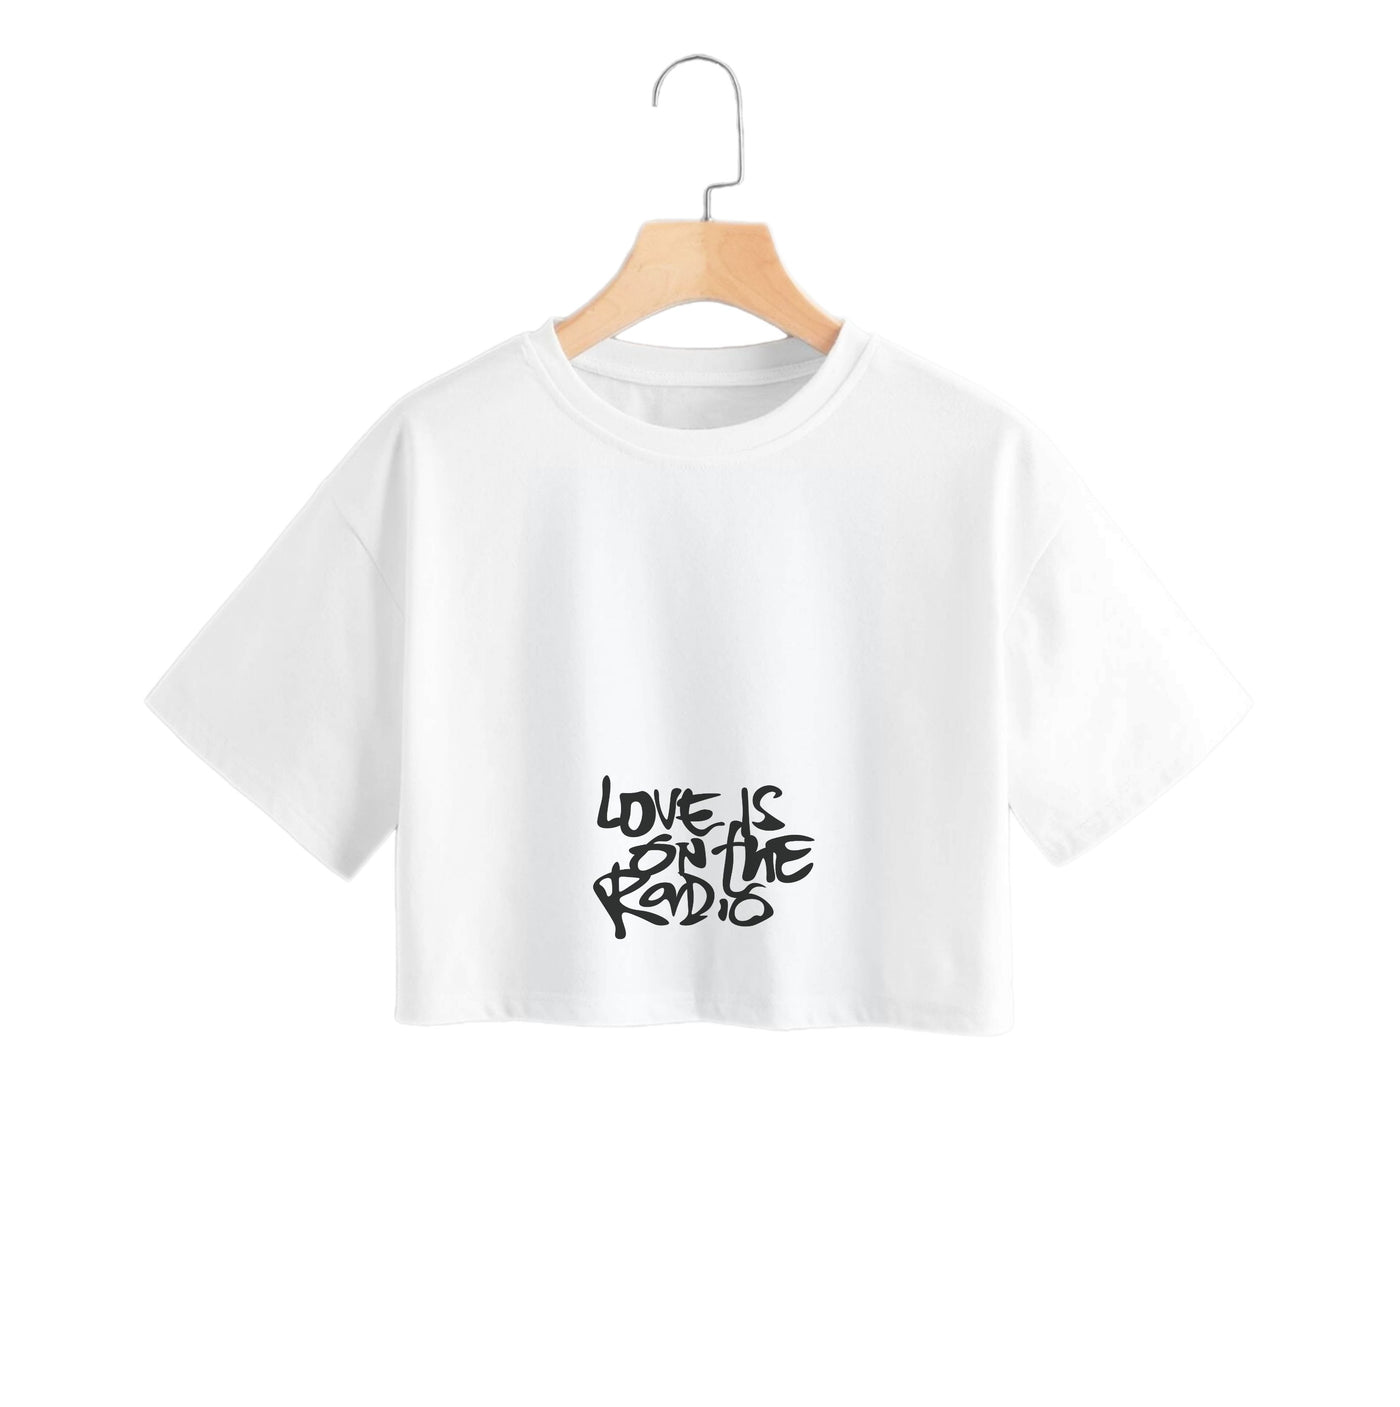 Love Is On The Radio - McFly Crop Top